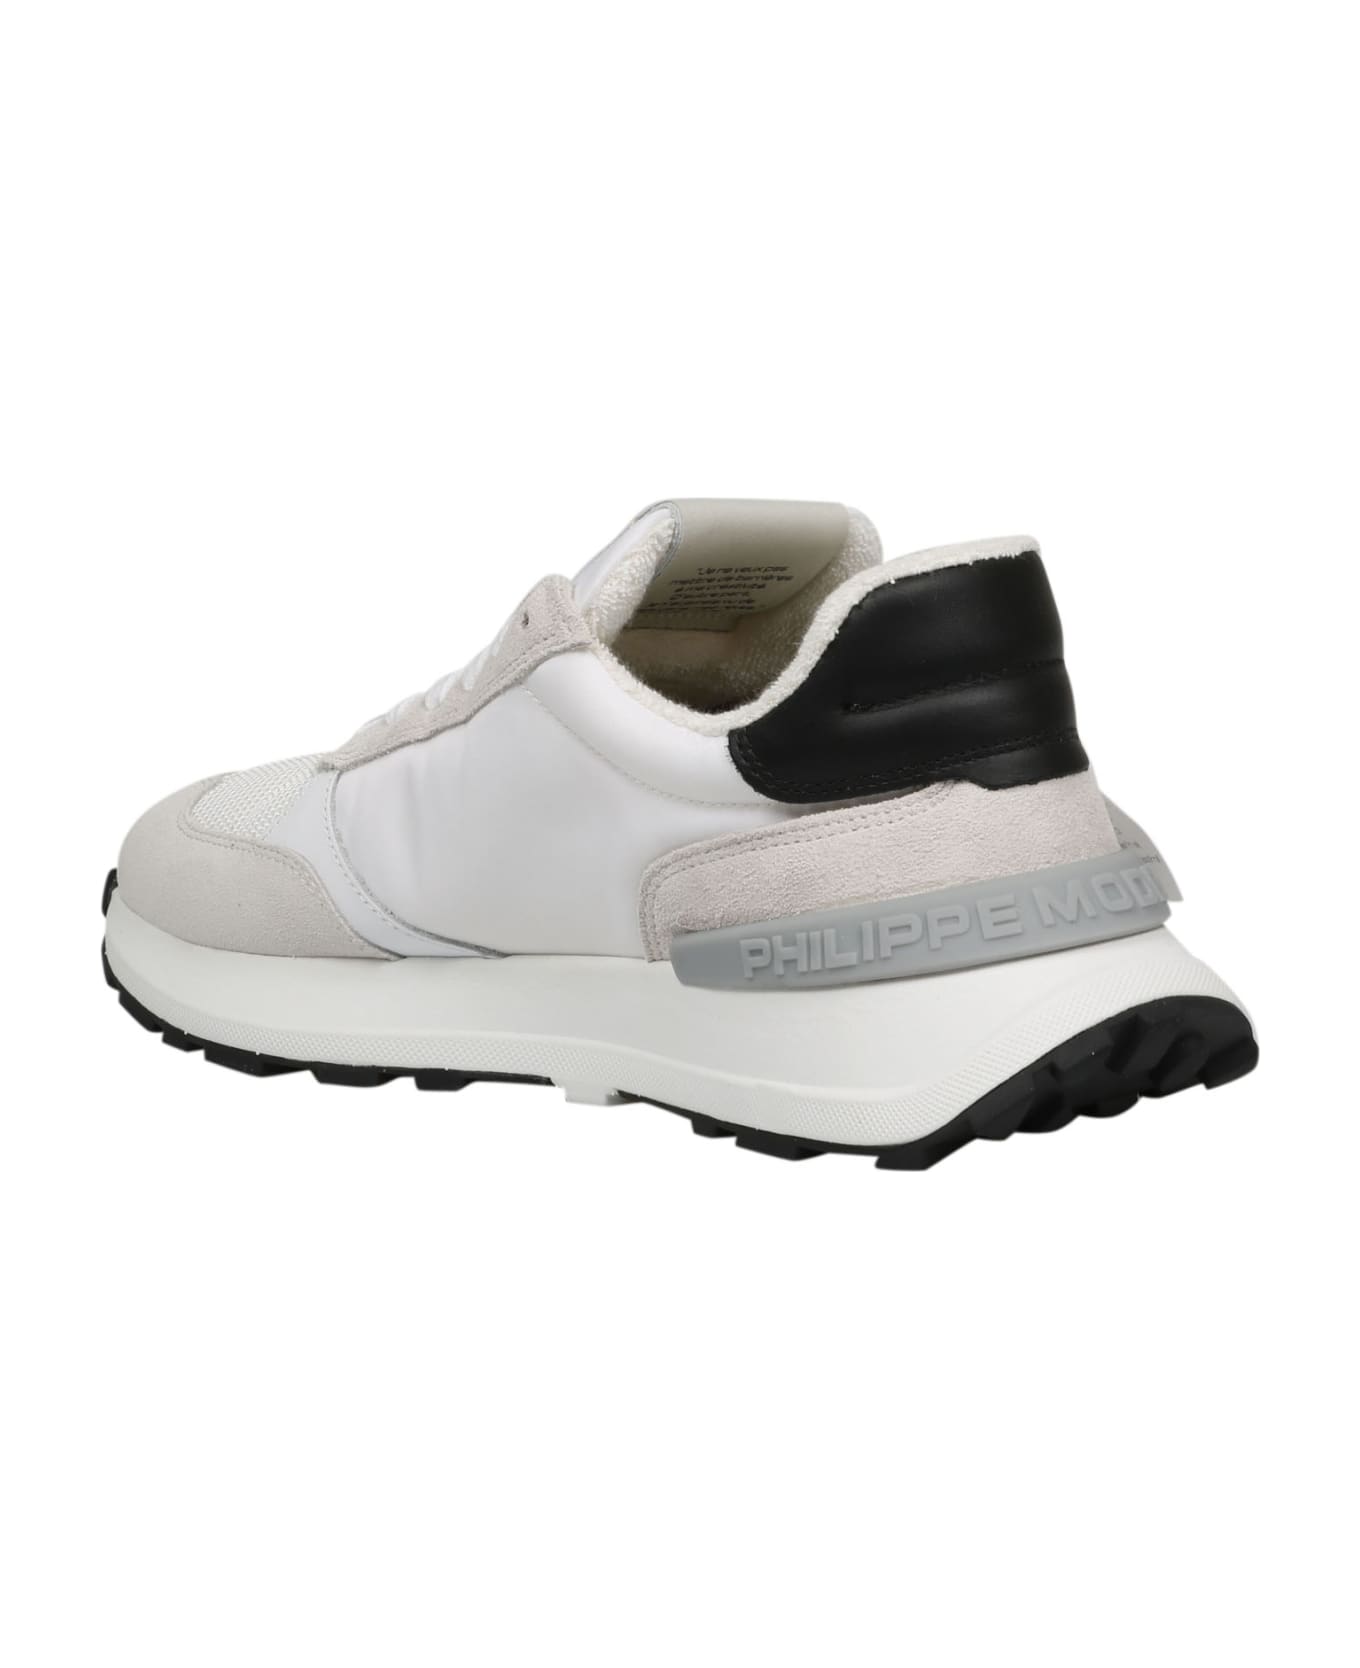 Philippe Model Antibes Low Sneakers - WHITE/GREY スニーカー